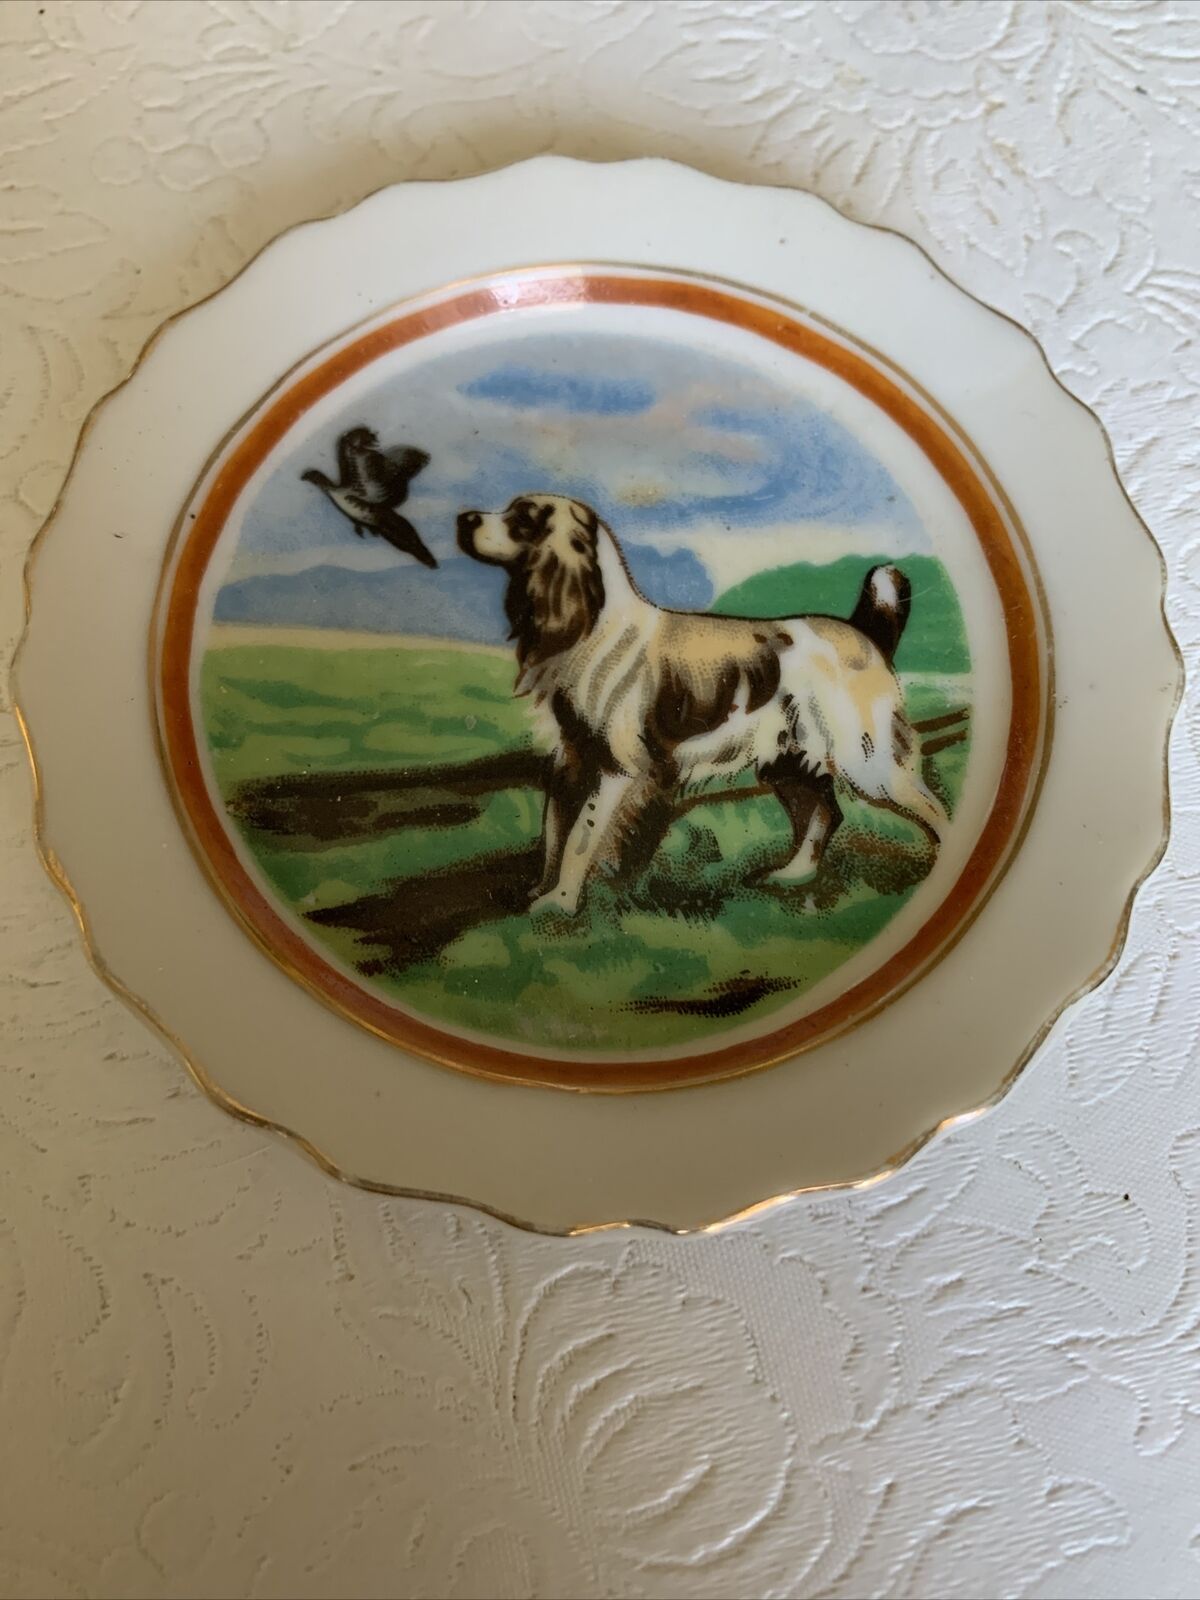 Small Plate with a Bird Dog Design - 3 3/4”